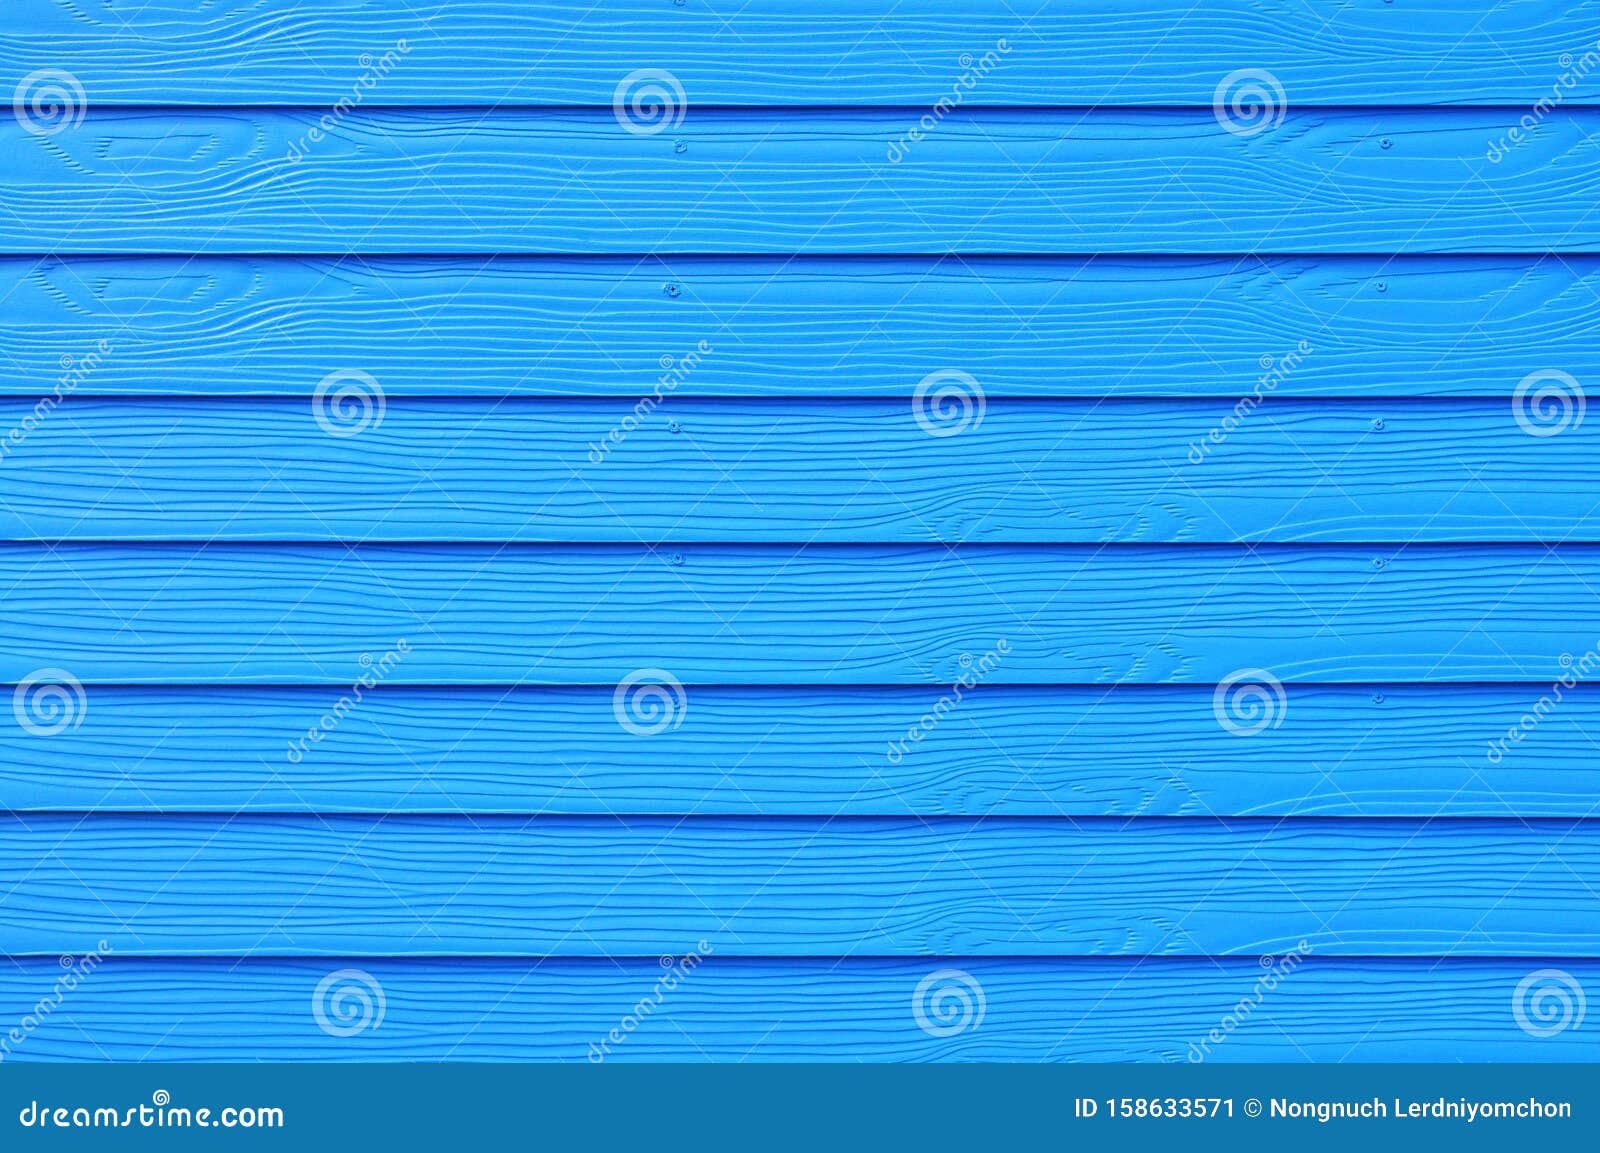 Blue Stain Pine Natural Wood WalTex Panel, Decorative Wall Paneling